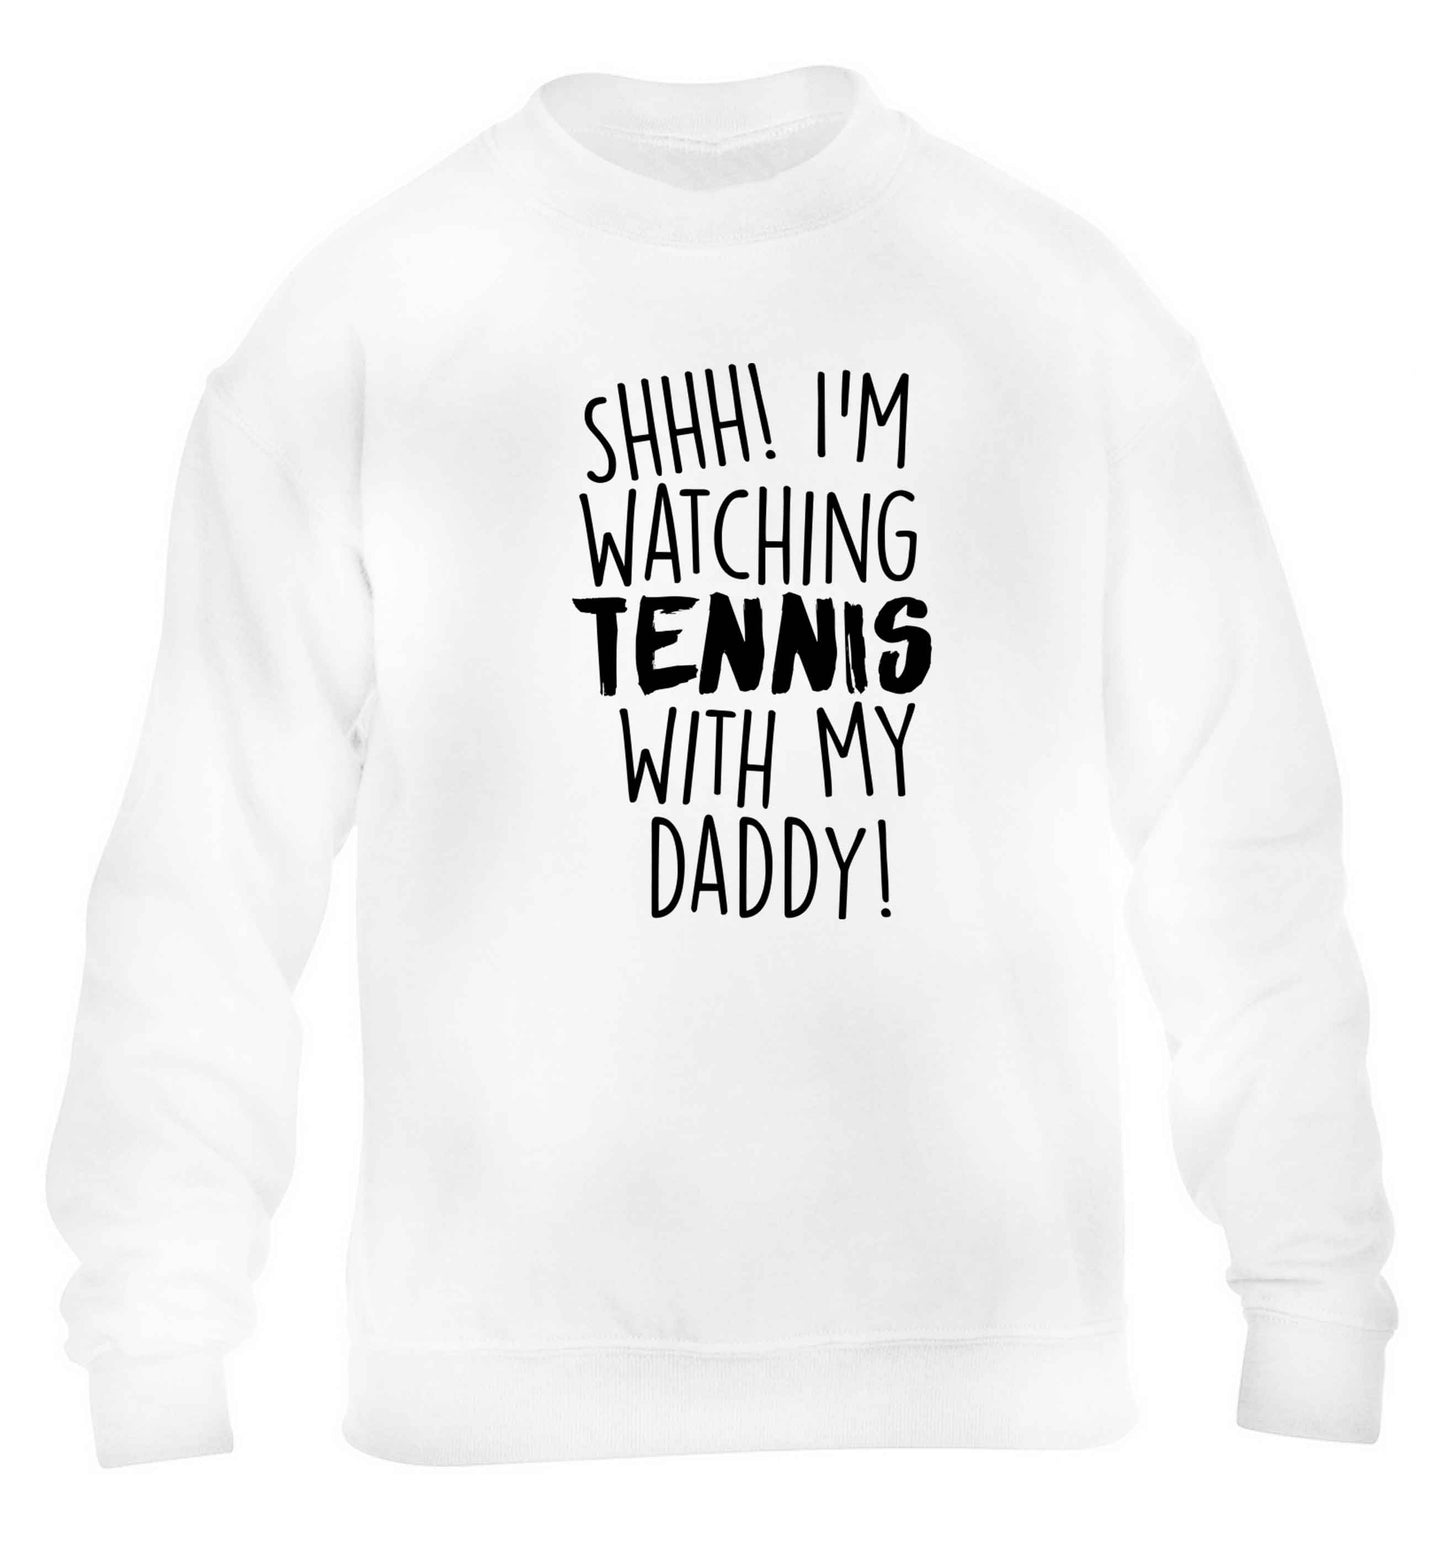 Shh! I'm watching tennis with my daddy! children's white sweater 12-13 Years